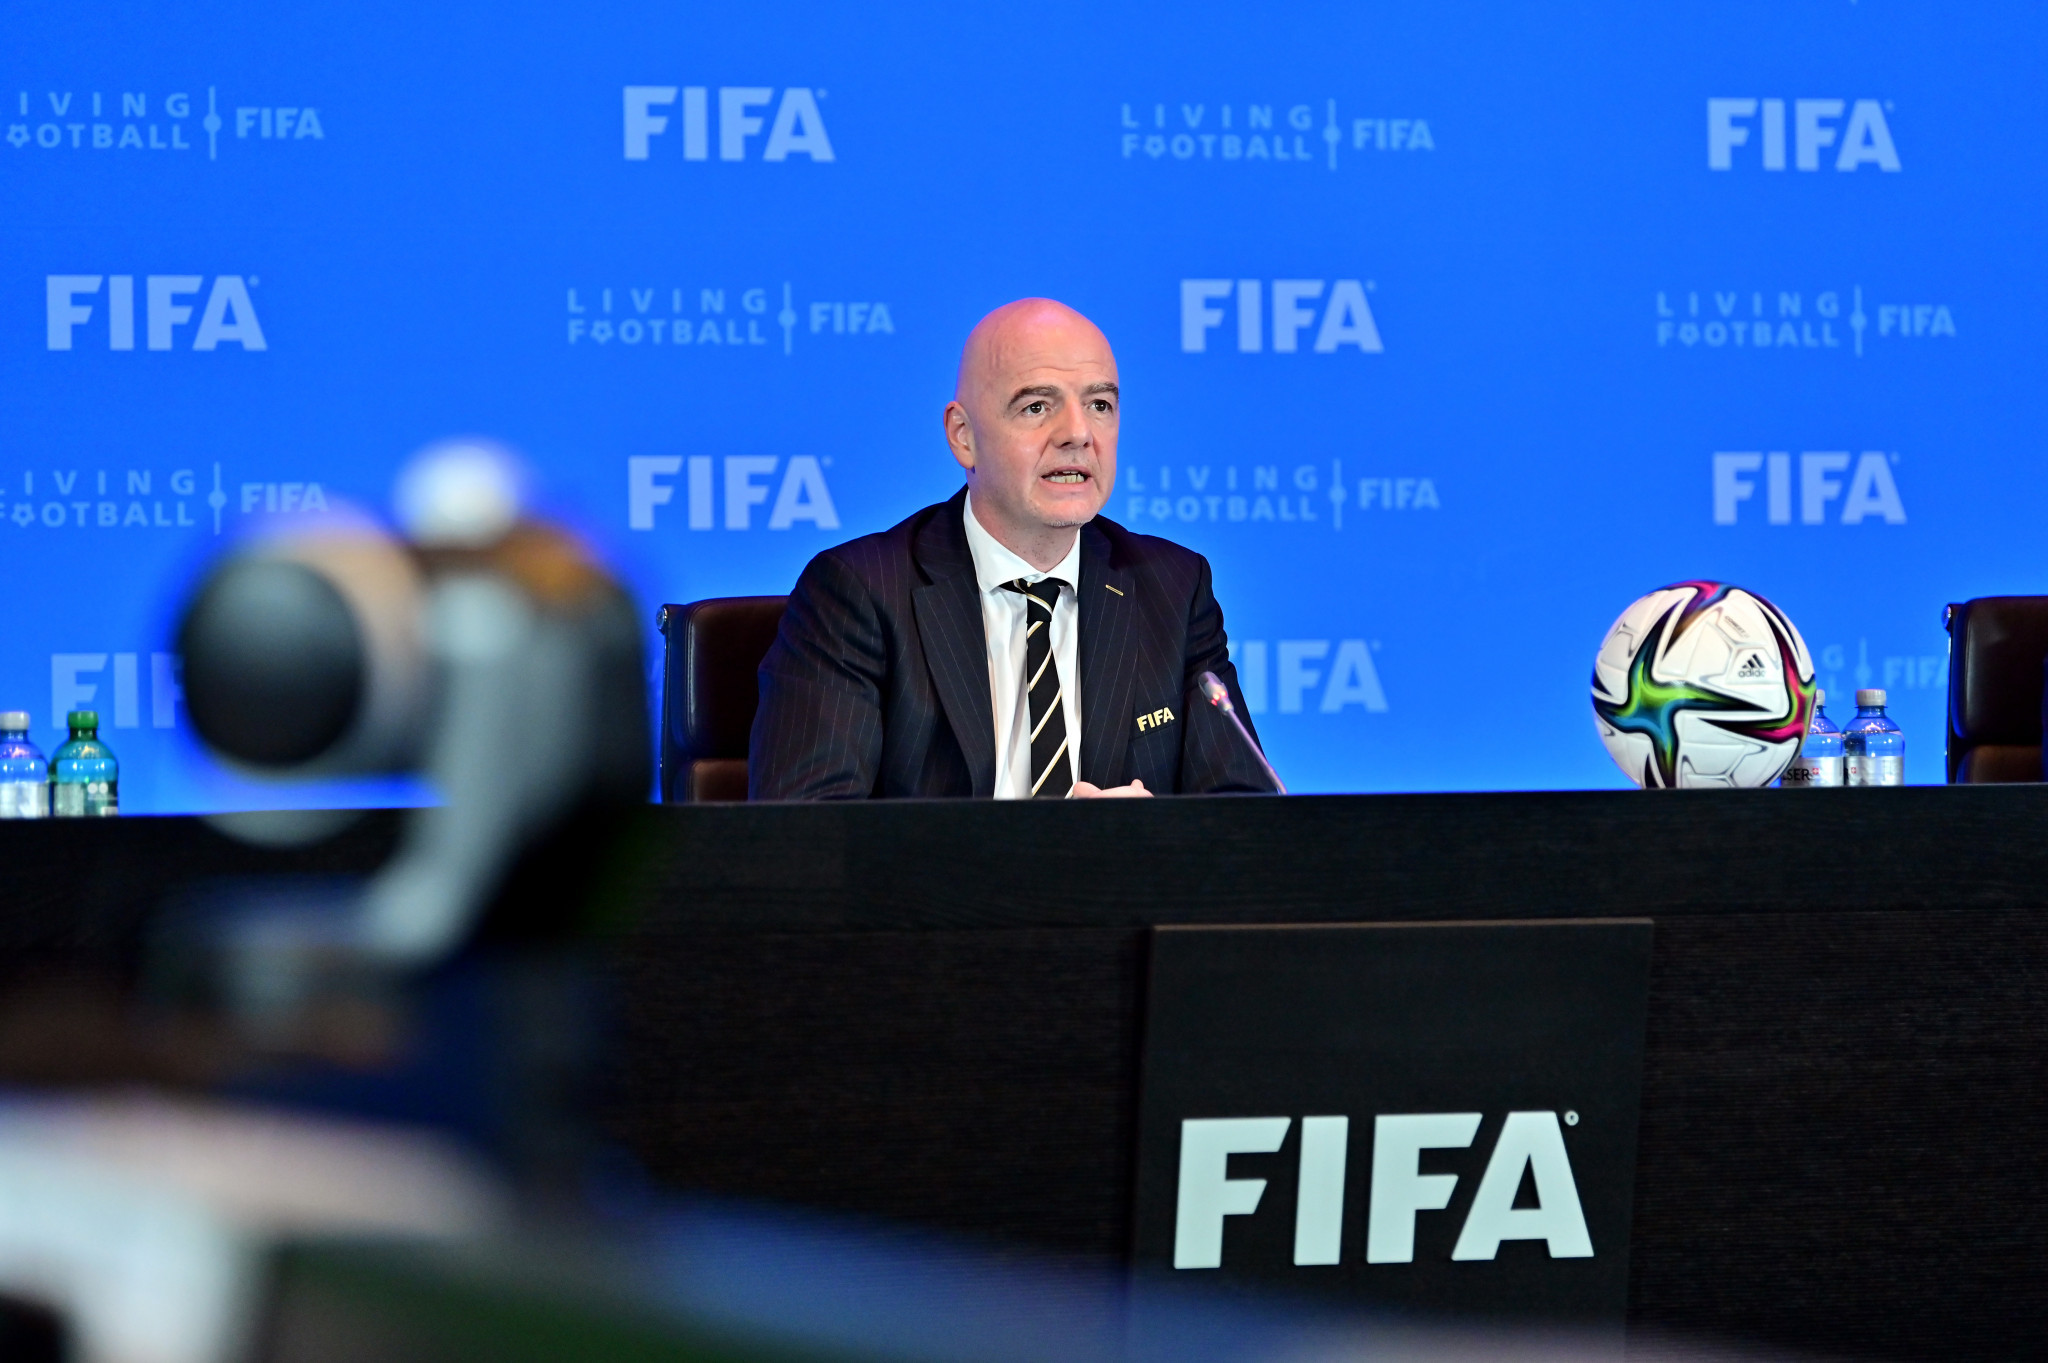 FIFA President Gianni Infantino is also an IOC member, meaning he would be in a difficult situation if he backed the idea of holding the World Cup every two years ©Getty Images